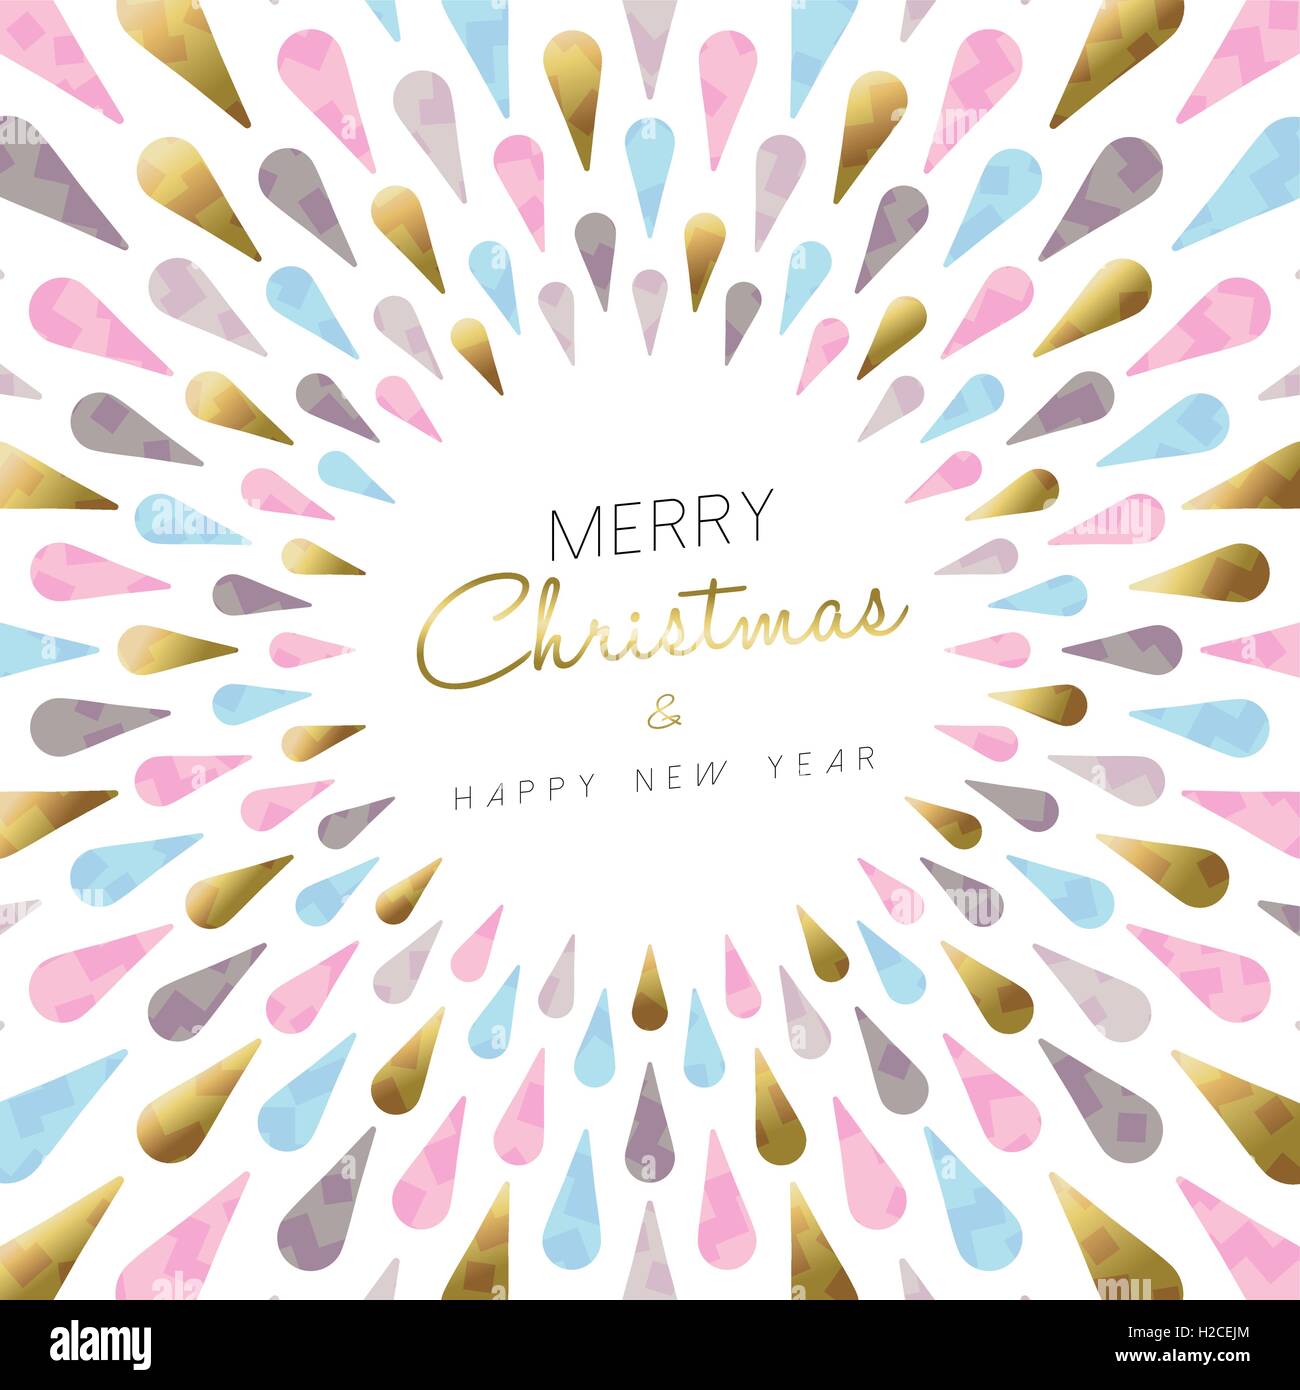 Luxury Merry Christmas and happy new year modern abstract style design in gold color for holiday season. EPS10 vector. Stock Vector